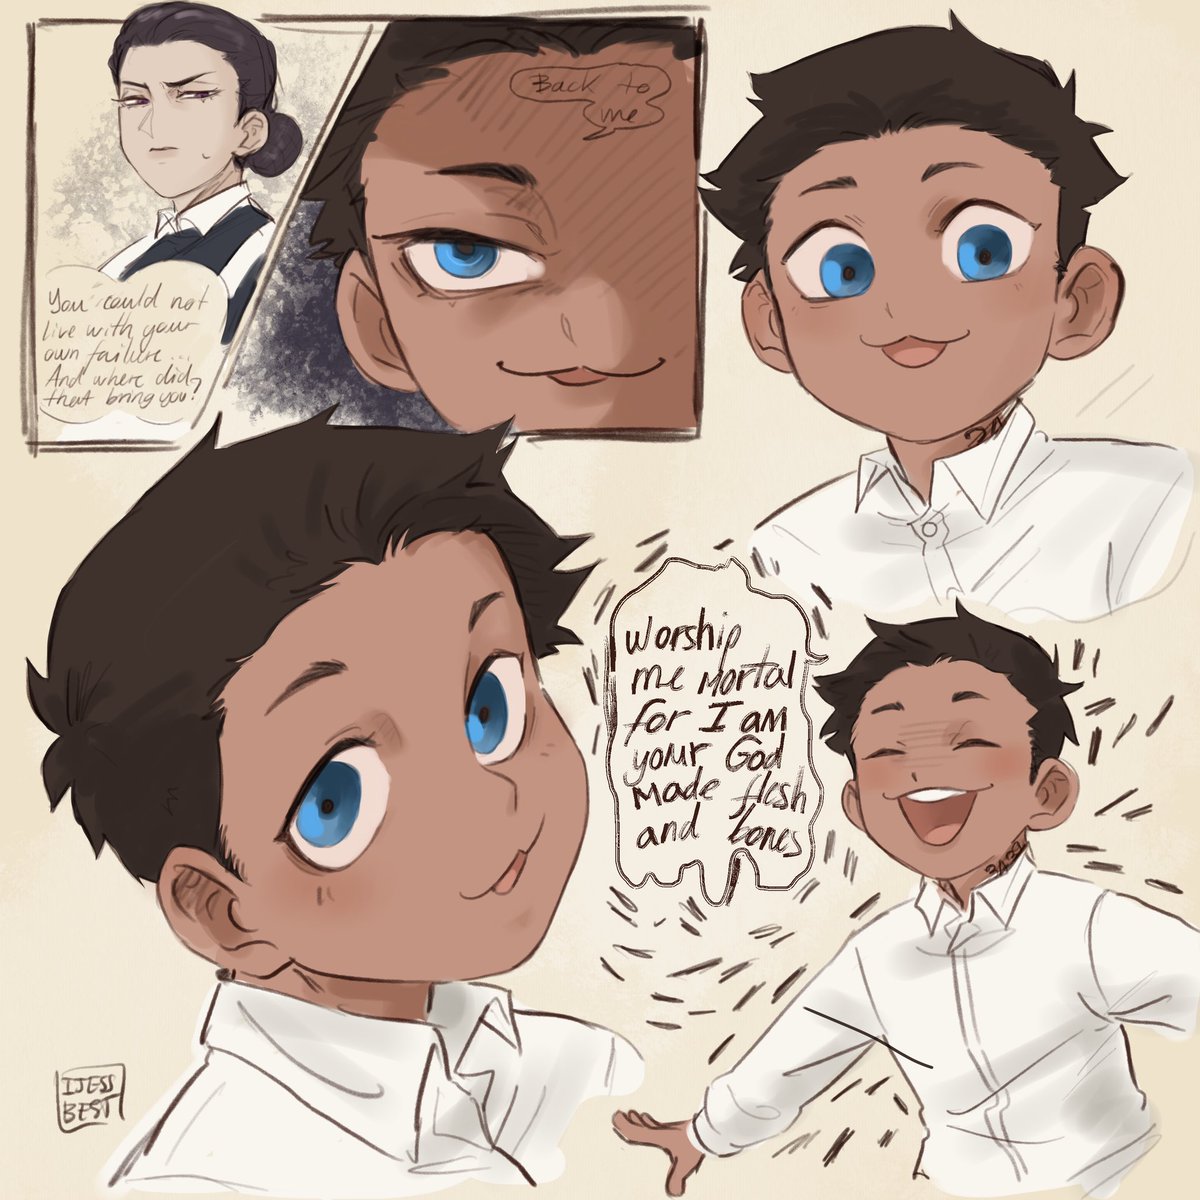 Today I just felt like drawing Phil form the promised neverland, a Lovecraftian god reborn as the cutest little boy. 